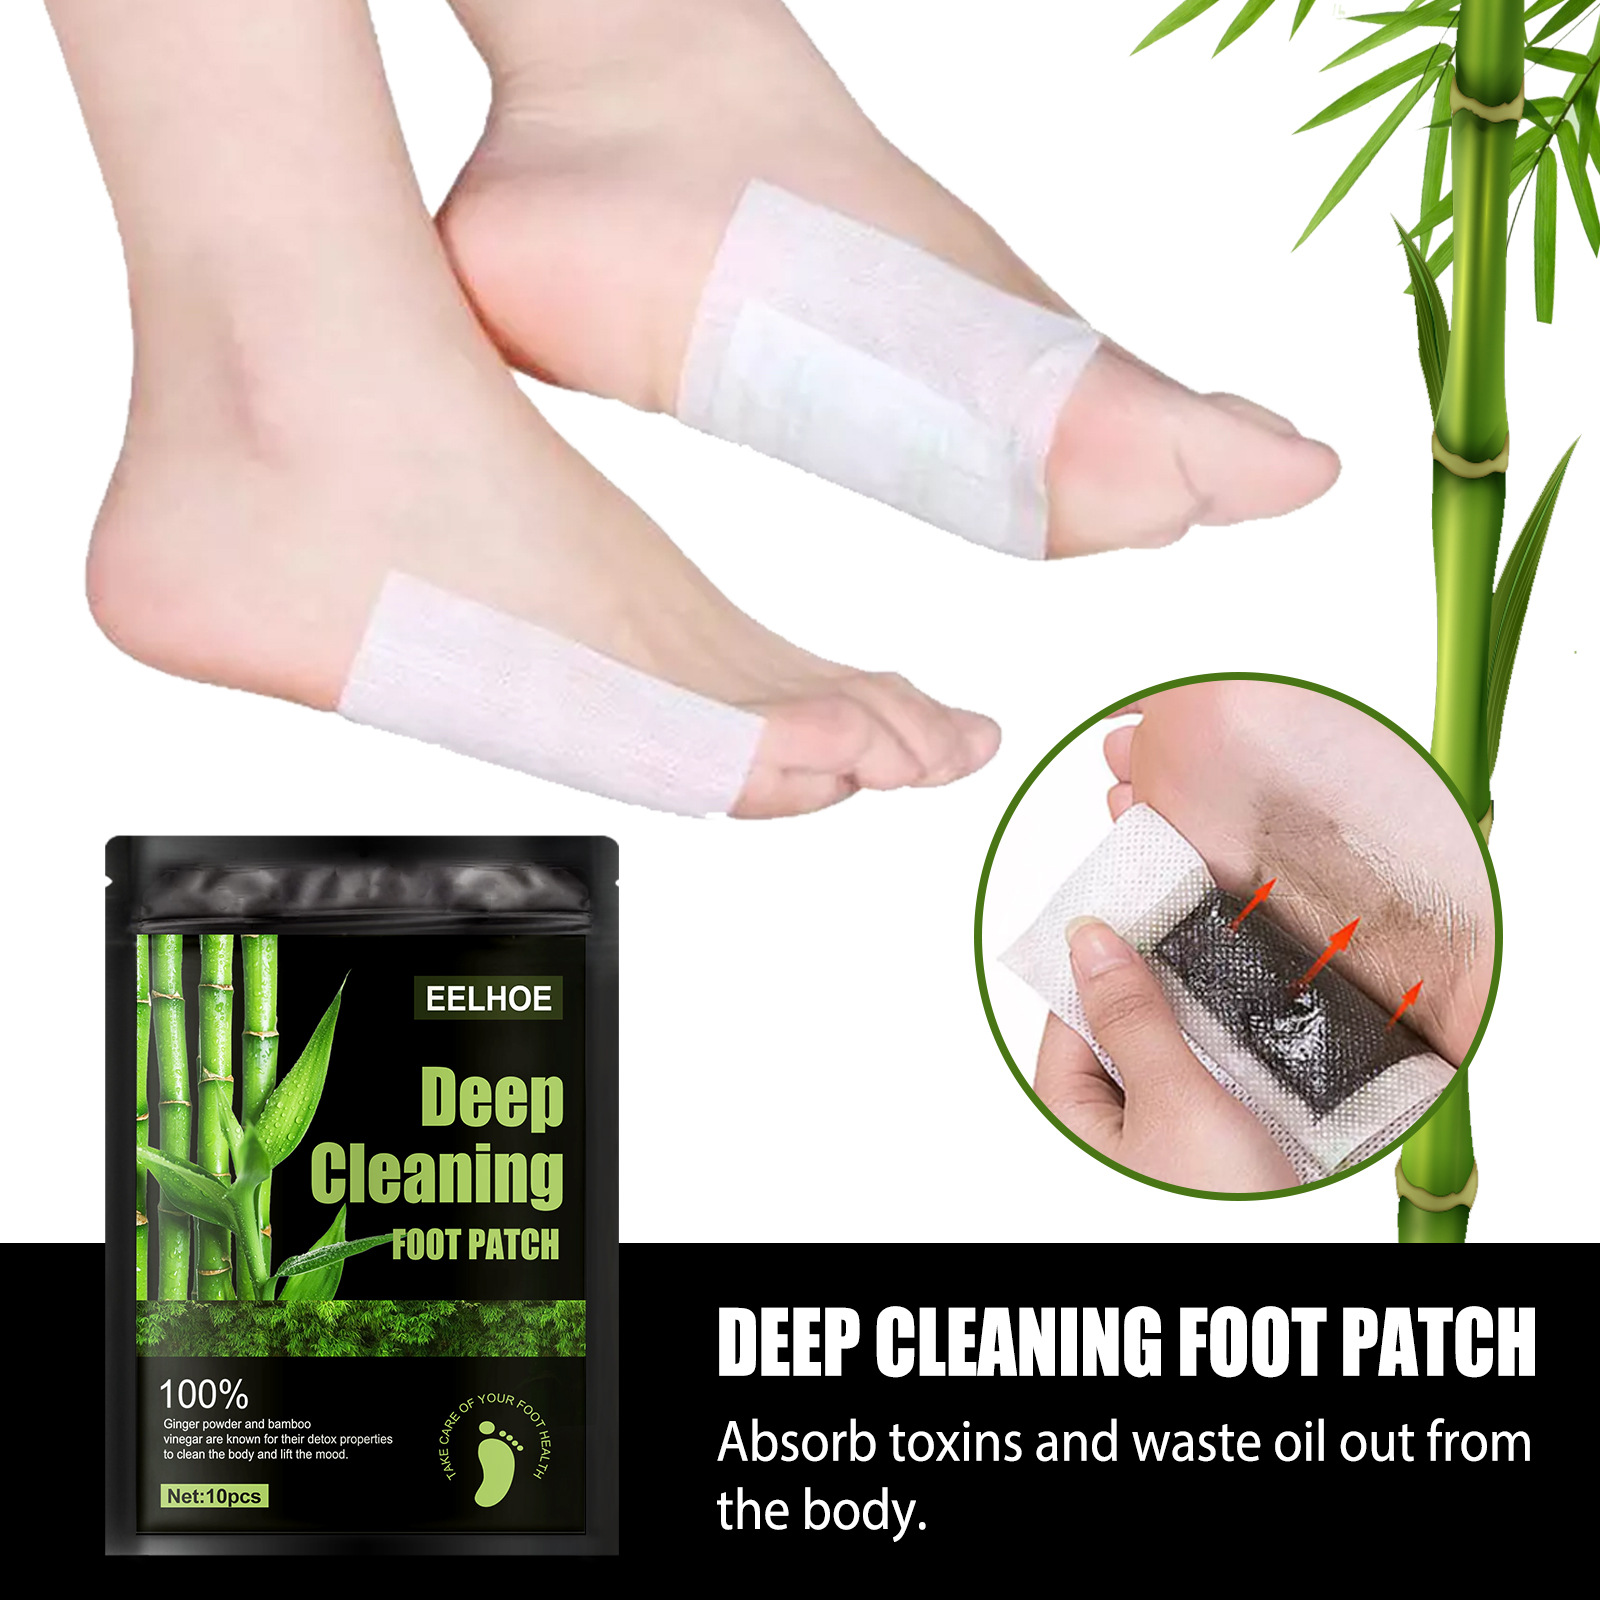 

1pcs=10sheets Detox Foot Patches Pads Treatment Deep Cleaning Feet Care Body Health Relief Stree Helps Sleep 1447